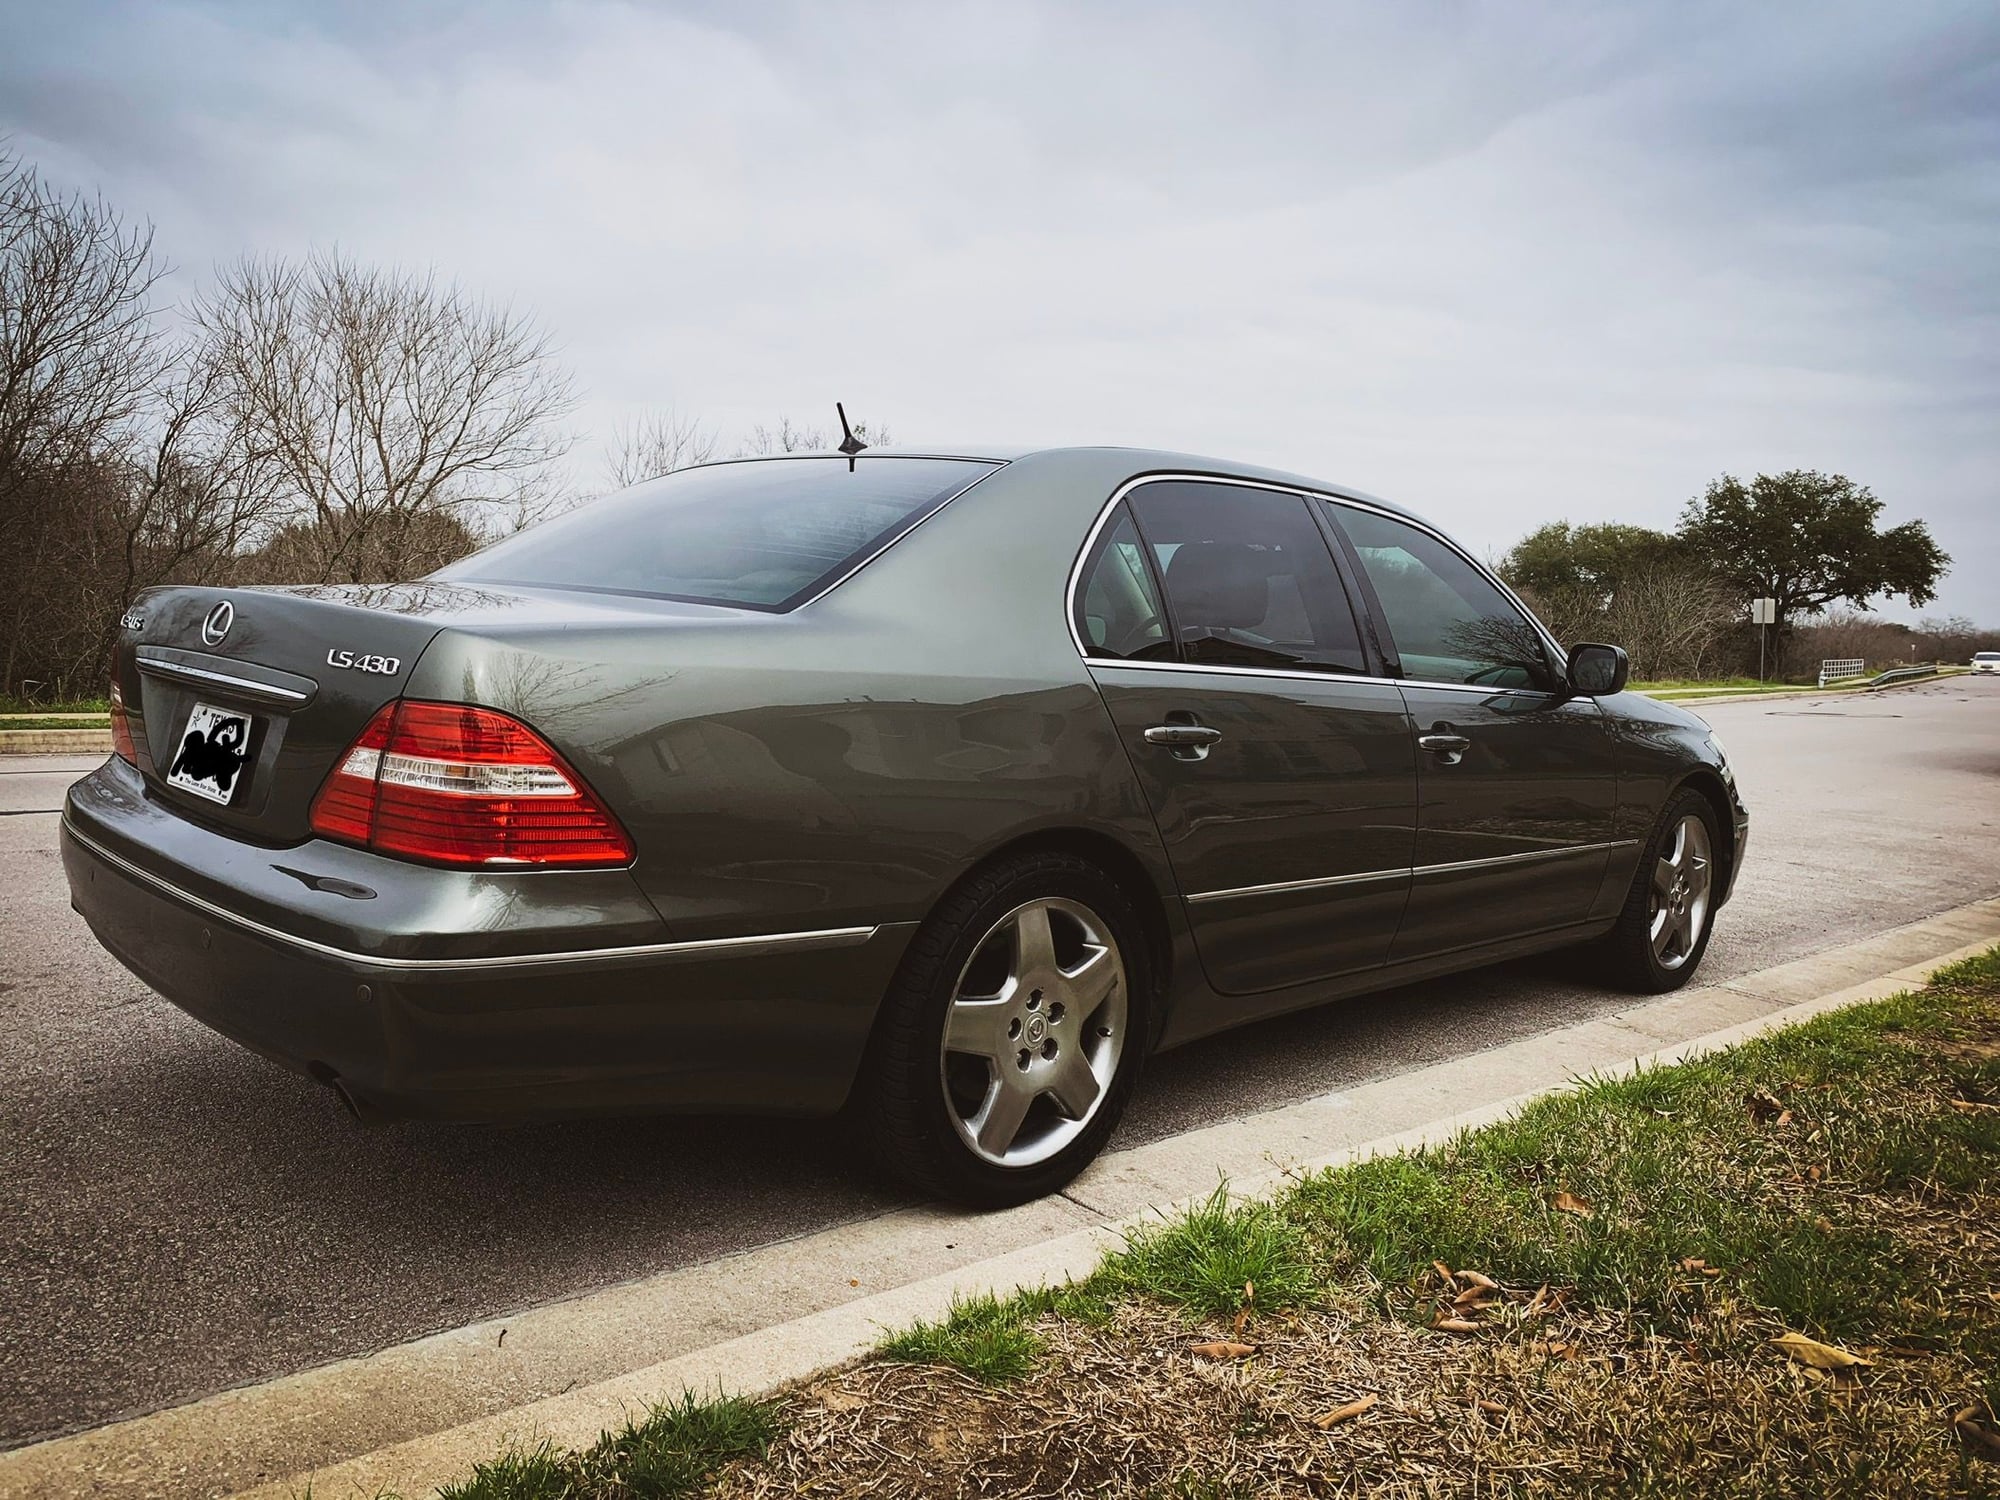 2004 Lexus LS430 - 2004 Lexus LS 430 - 131k miles - Excellent Codnition - Used - VIN JTHBN36F440156649 - 8 cyl - 2WD - Automatic - Sedan - Other - Austin, TX 78748, United States